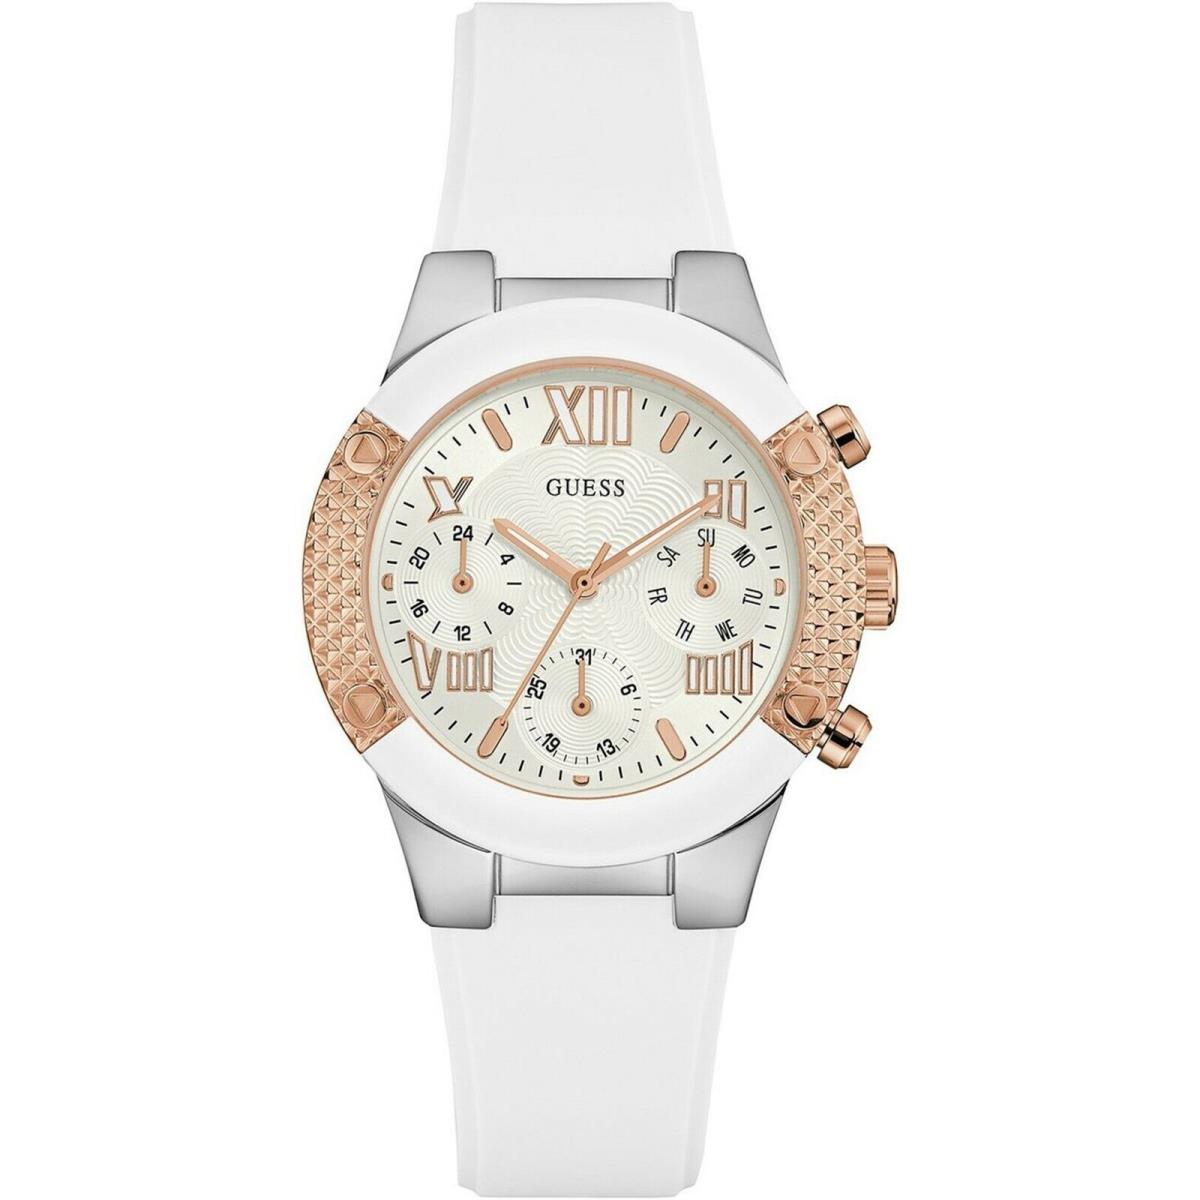 Guess W0773L1 Ladies Casual Multi-function